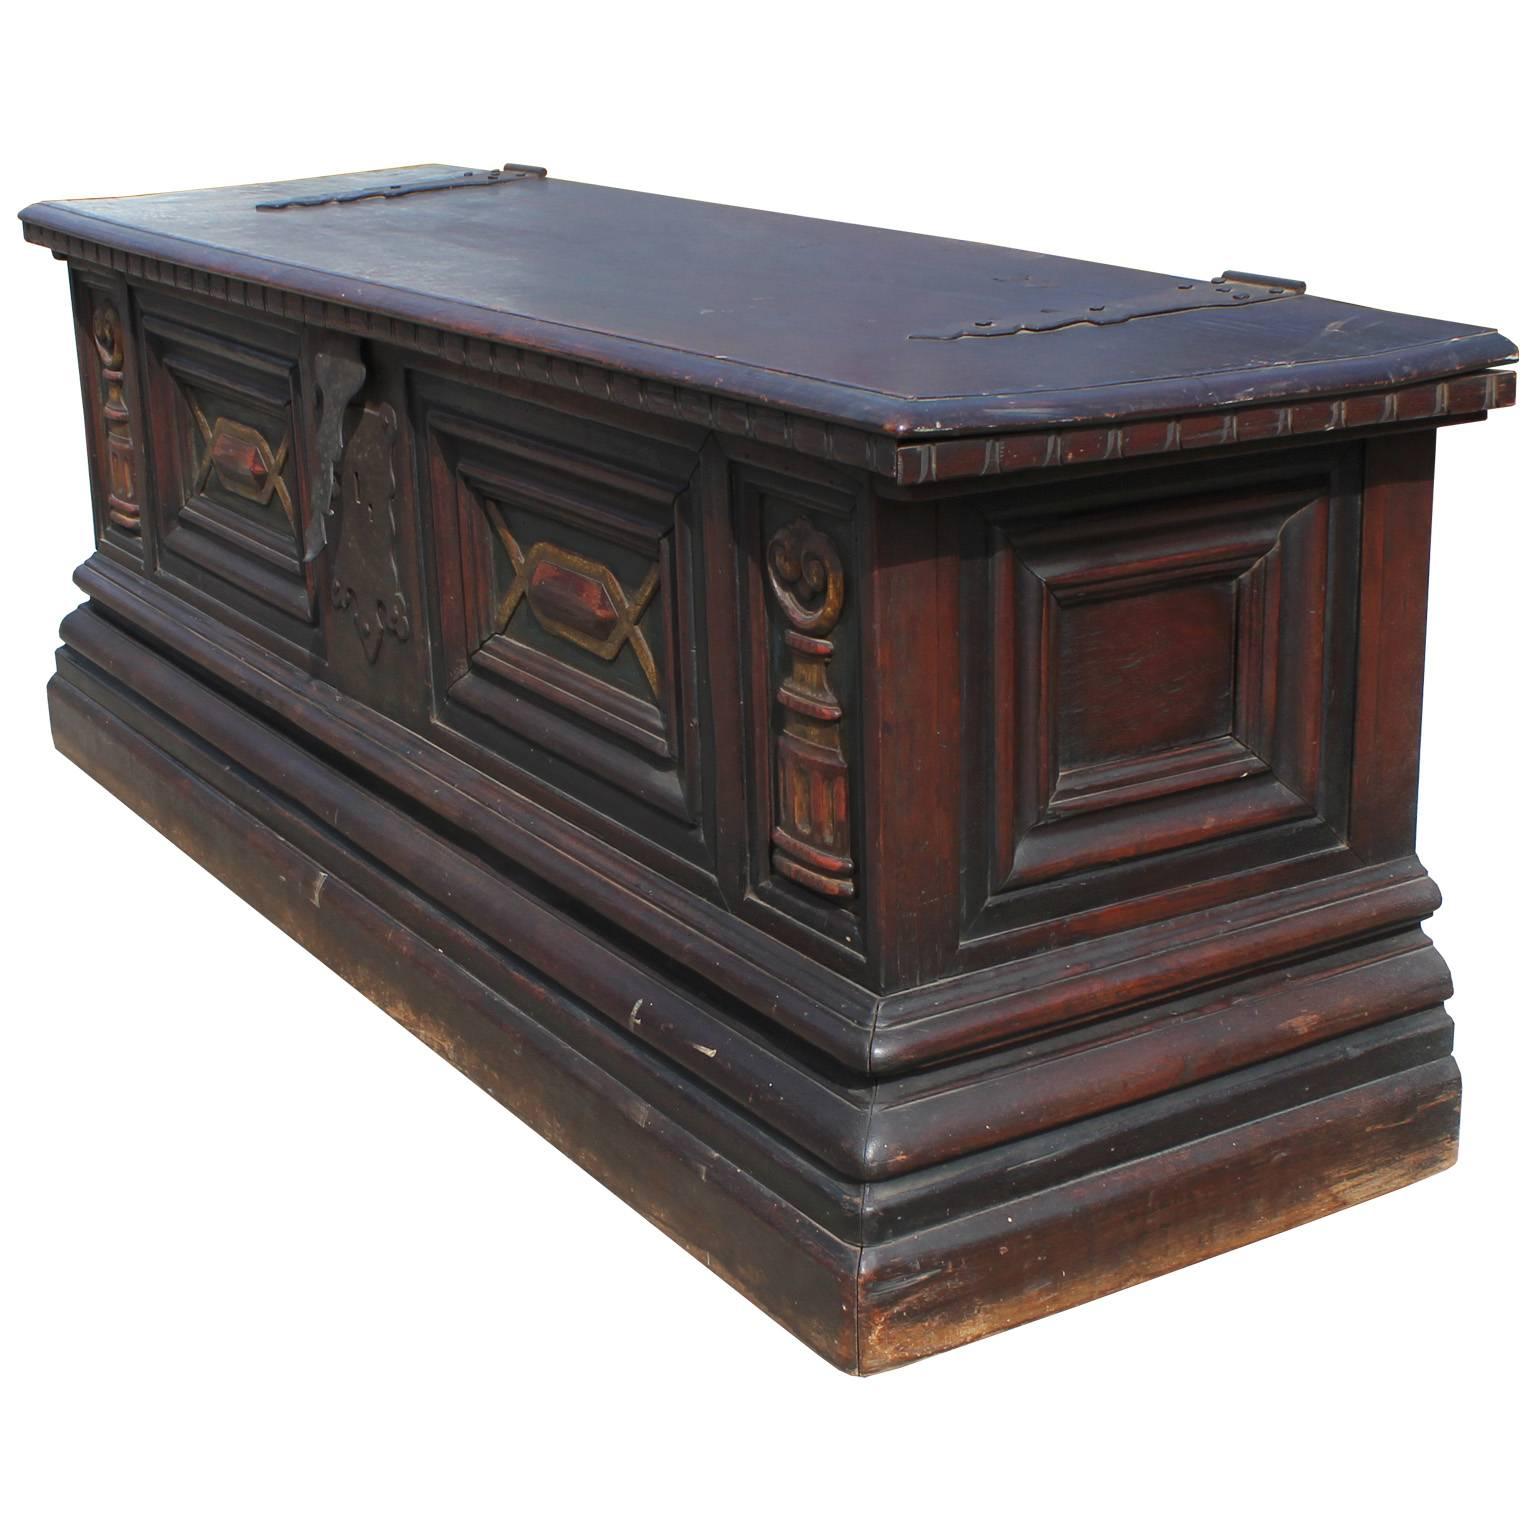 Wonderful, heavy chest. Intricate motif is finished soft washes of color. Black hammered hardware finishes the piece.